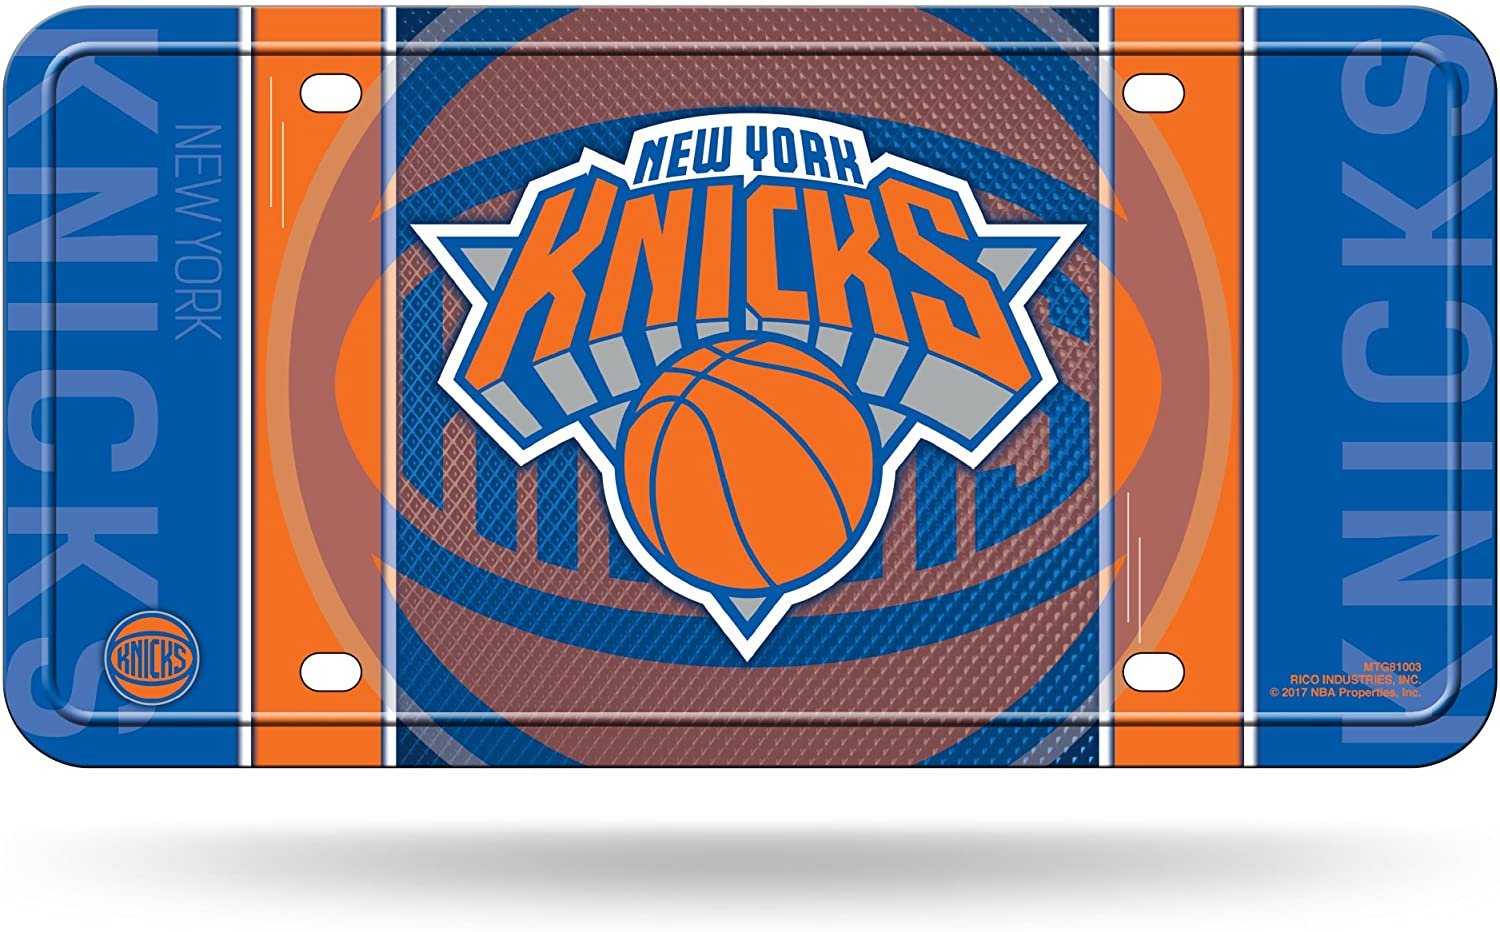 New York Knicks Metal Auto Tag License Plate, Jersey Design, 6x12 Inch